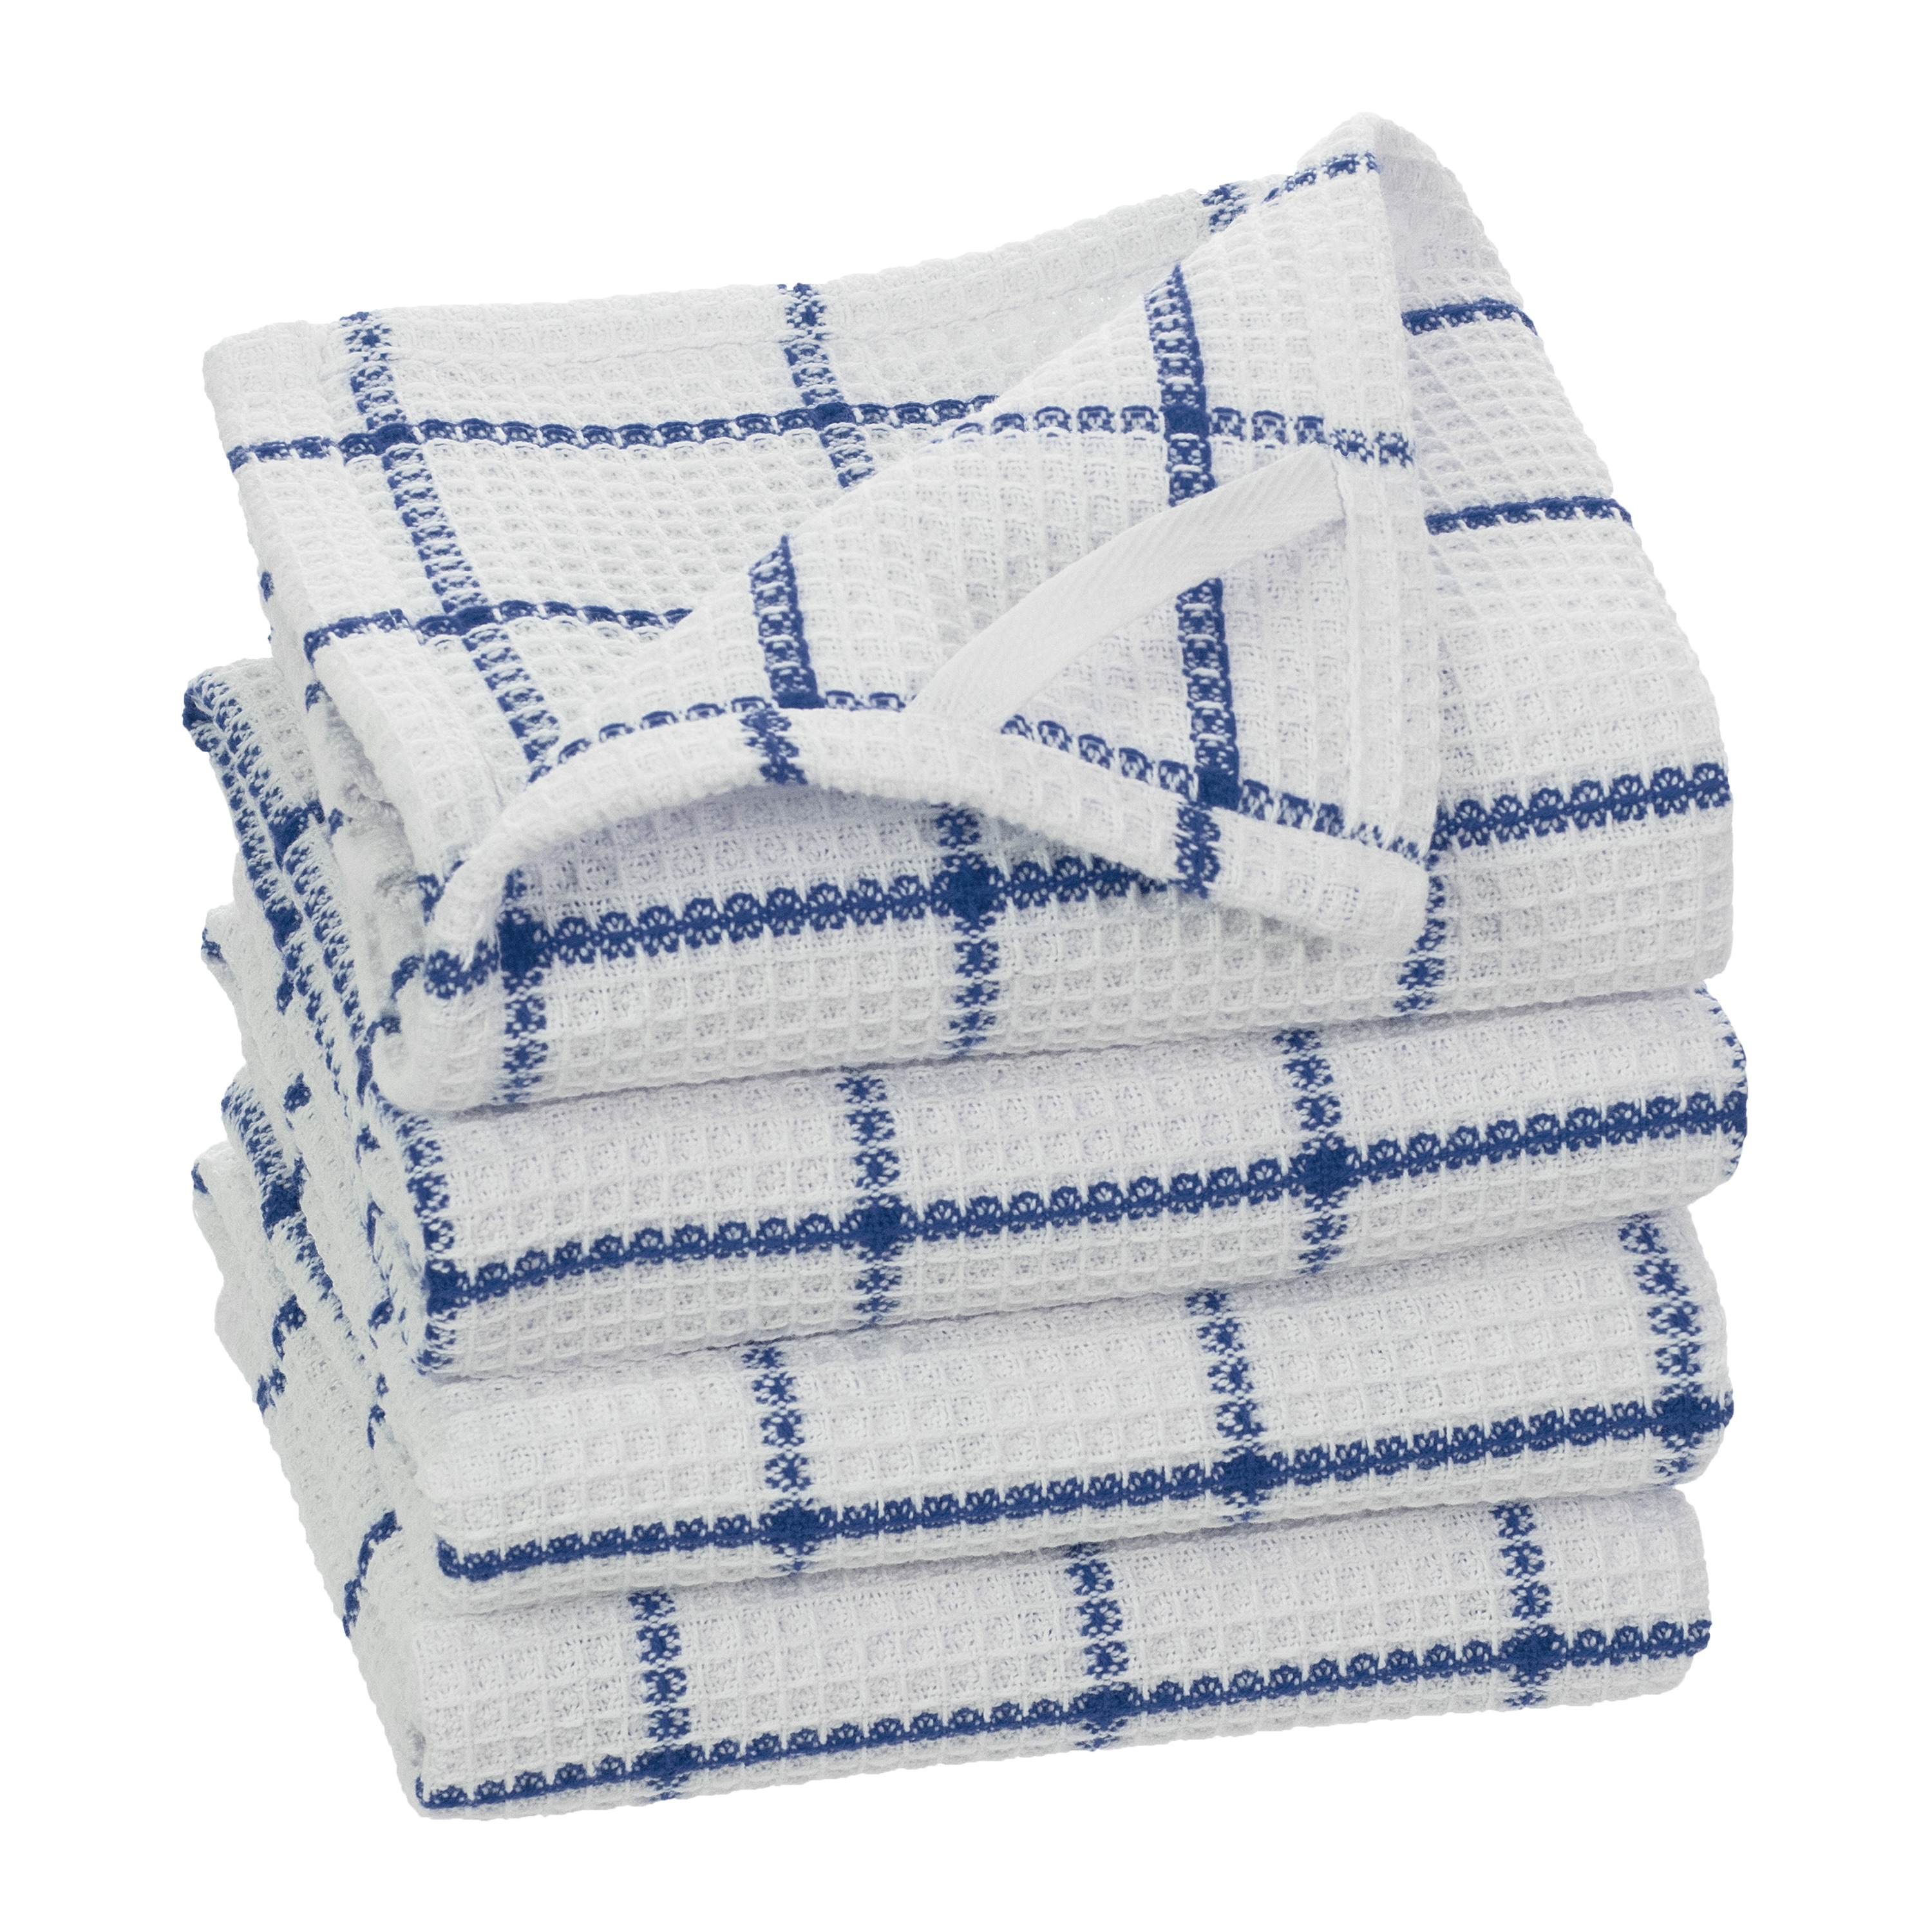 https://ak1.ostkcdn.com/images/products/is/images/direct/46fd594dd63199abfe0234cb04381b4c8fda87c7/Fabstyles-Solo-Waffle-Cotton-Kitchen-Towel-Set-of-4.jpg